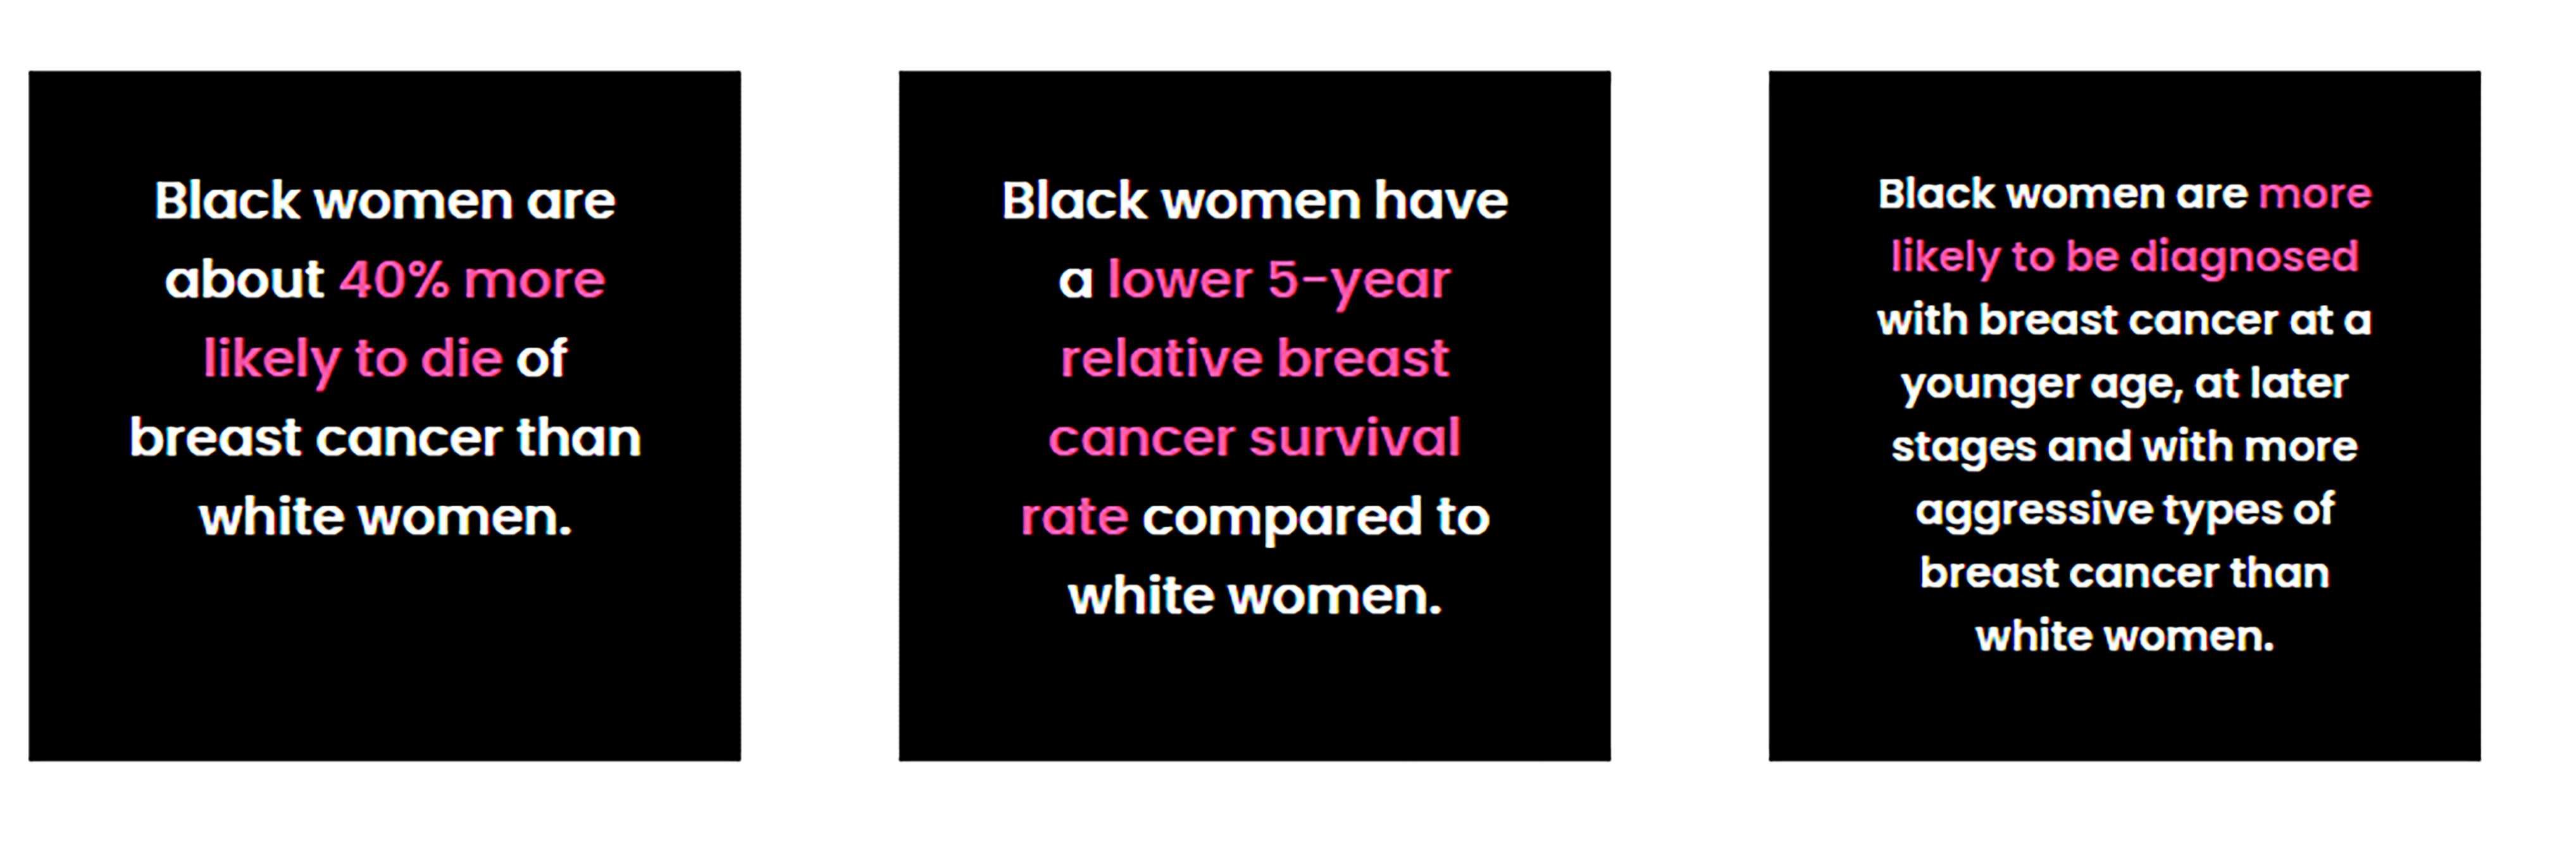 Facts about black women and breast cancer 